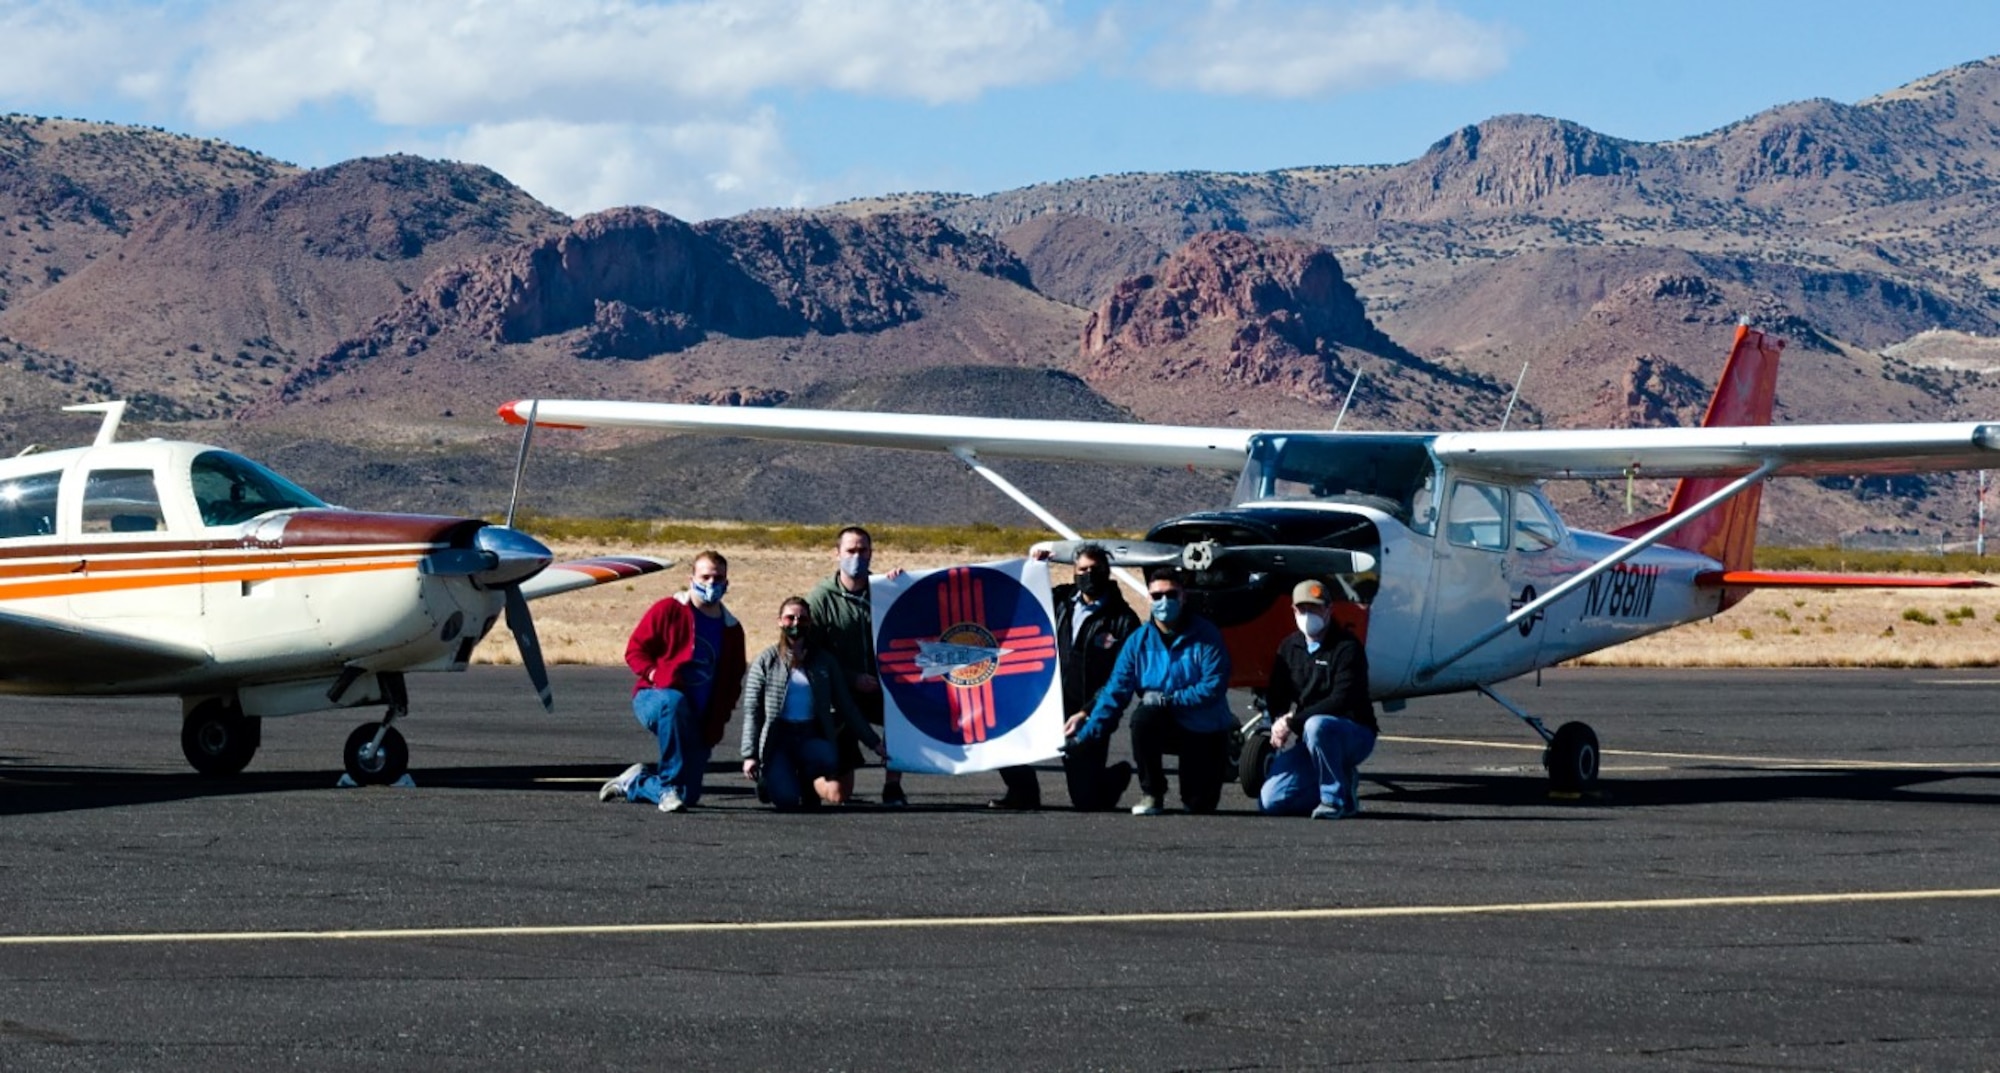 Group photo of Society of Flight Test Engineers New Mexico Chapter officers in front of two small aircraft